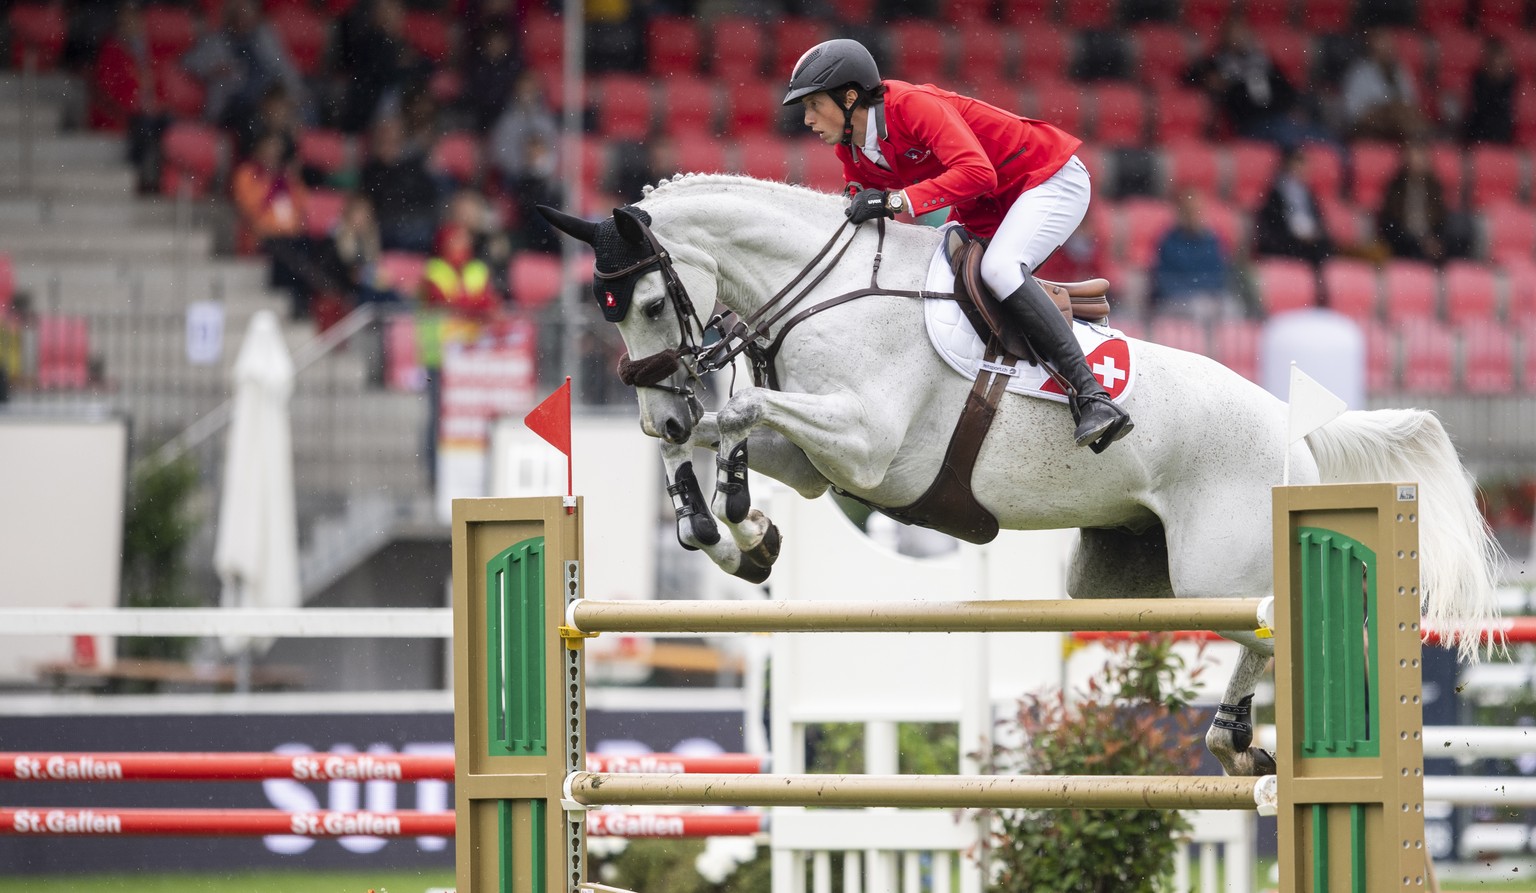 Martin Fuchs from Switzerland on Leone Jei at the &quot;Longines FEI Jumping Nations Cup of Switzerland&quot; during the CSIO Show Jumping in St. Gallen, Switzerland, Sunday, June 6, 2021. (KEYSTONE/E ...